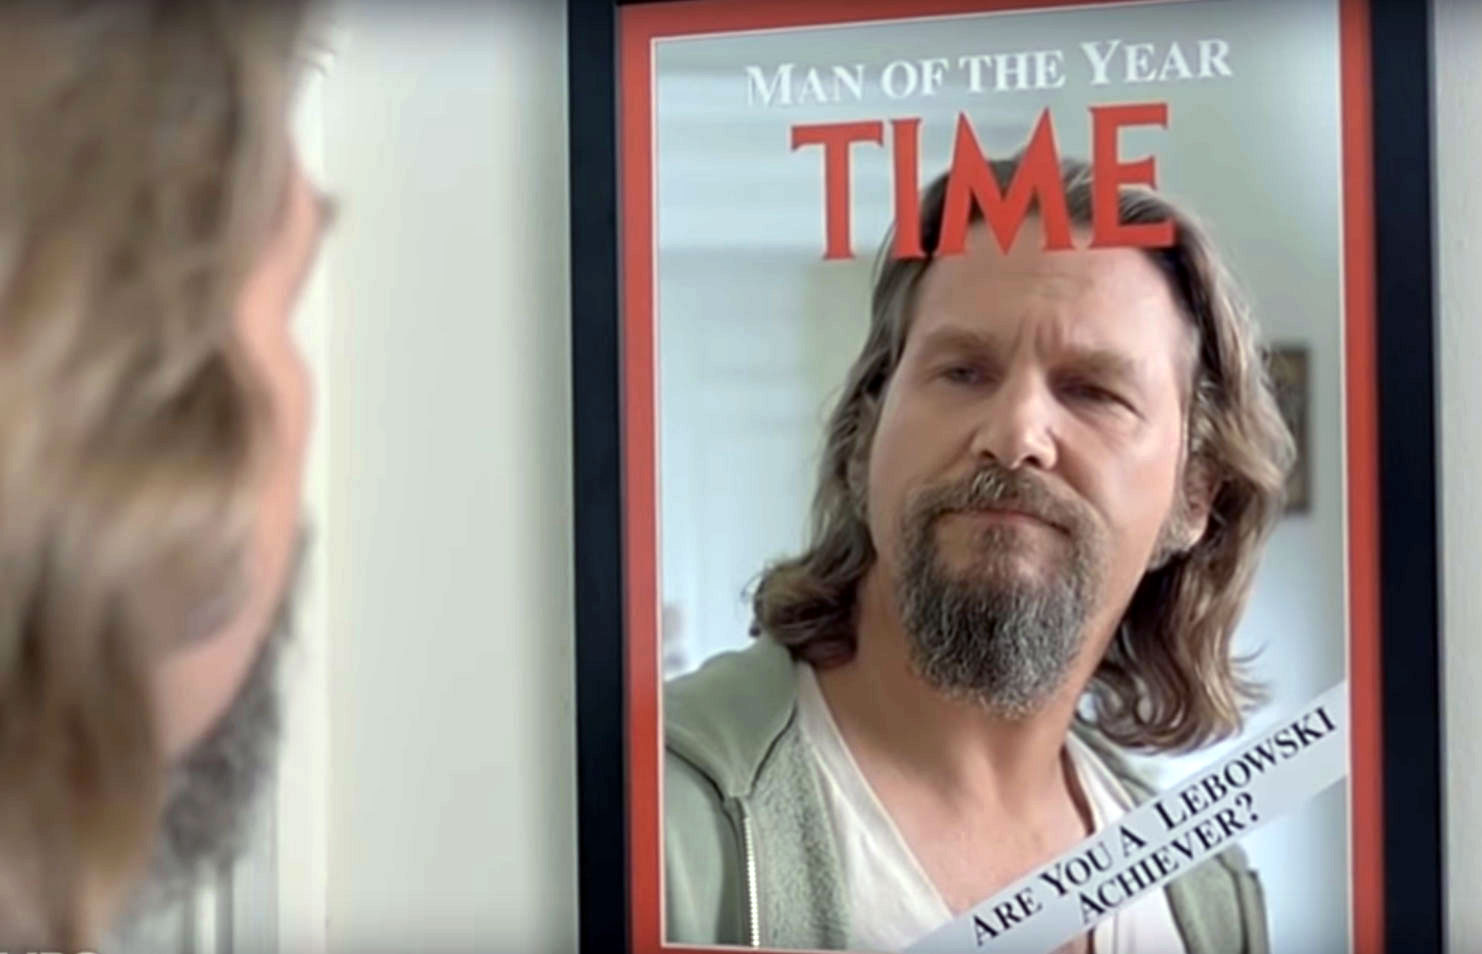 Man of the year Image